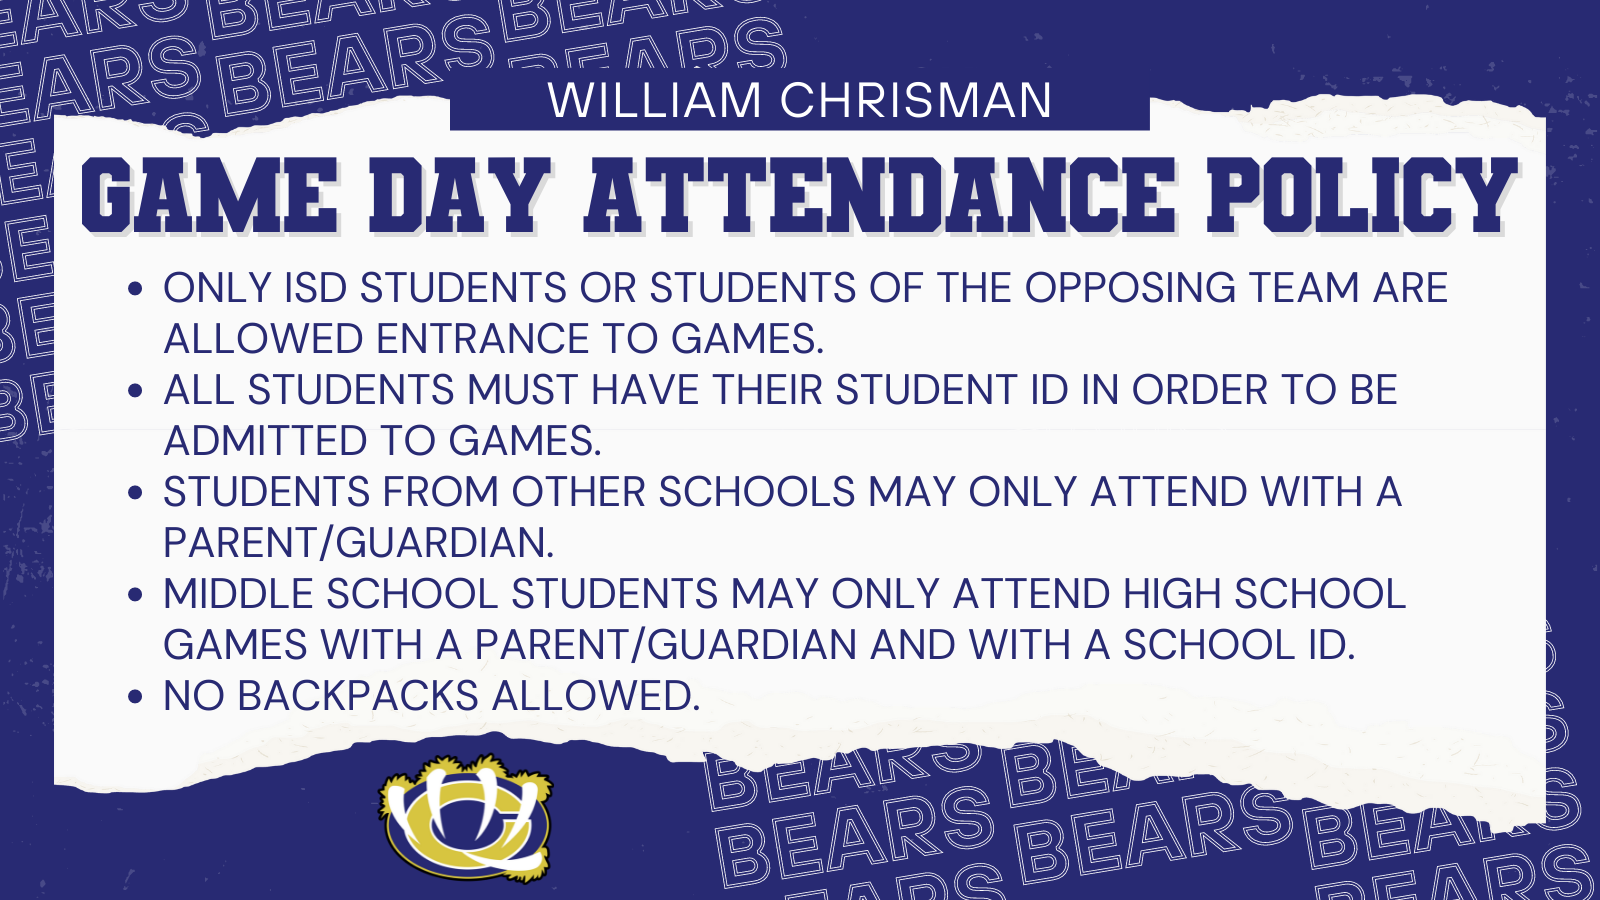 WC Game Day Attendance Policy